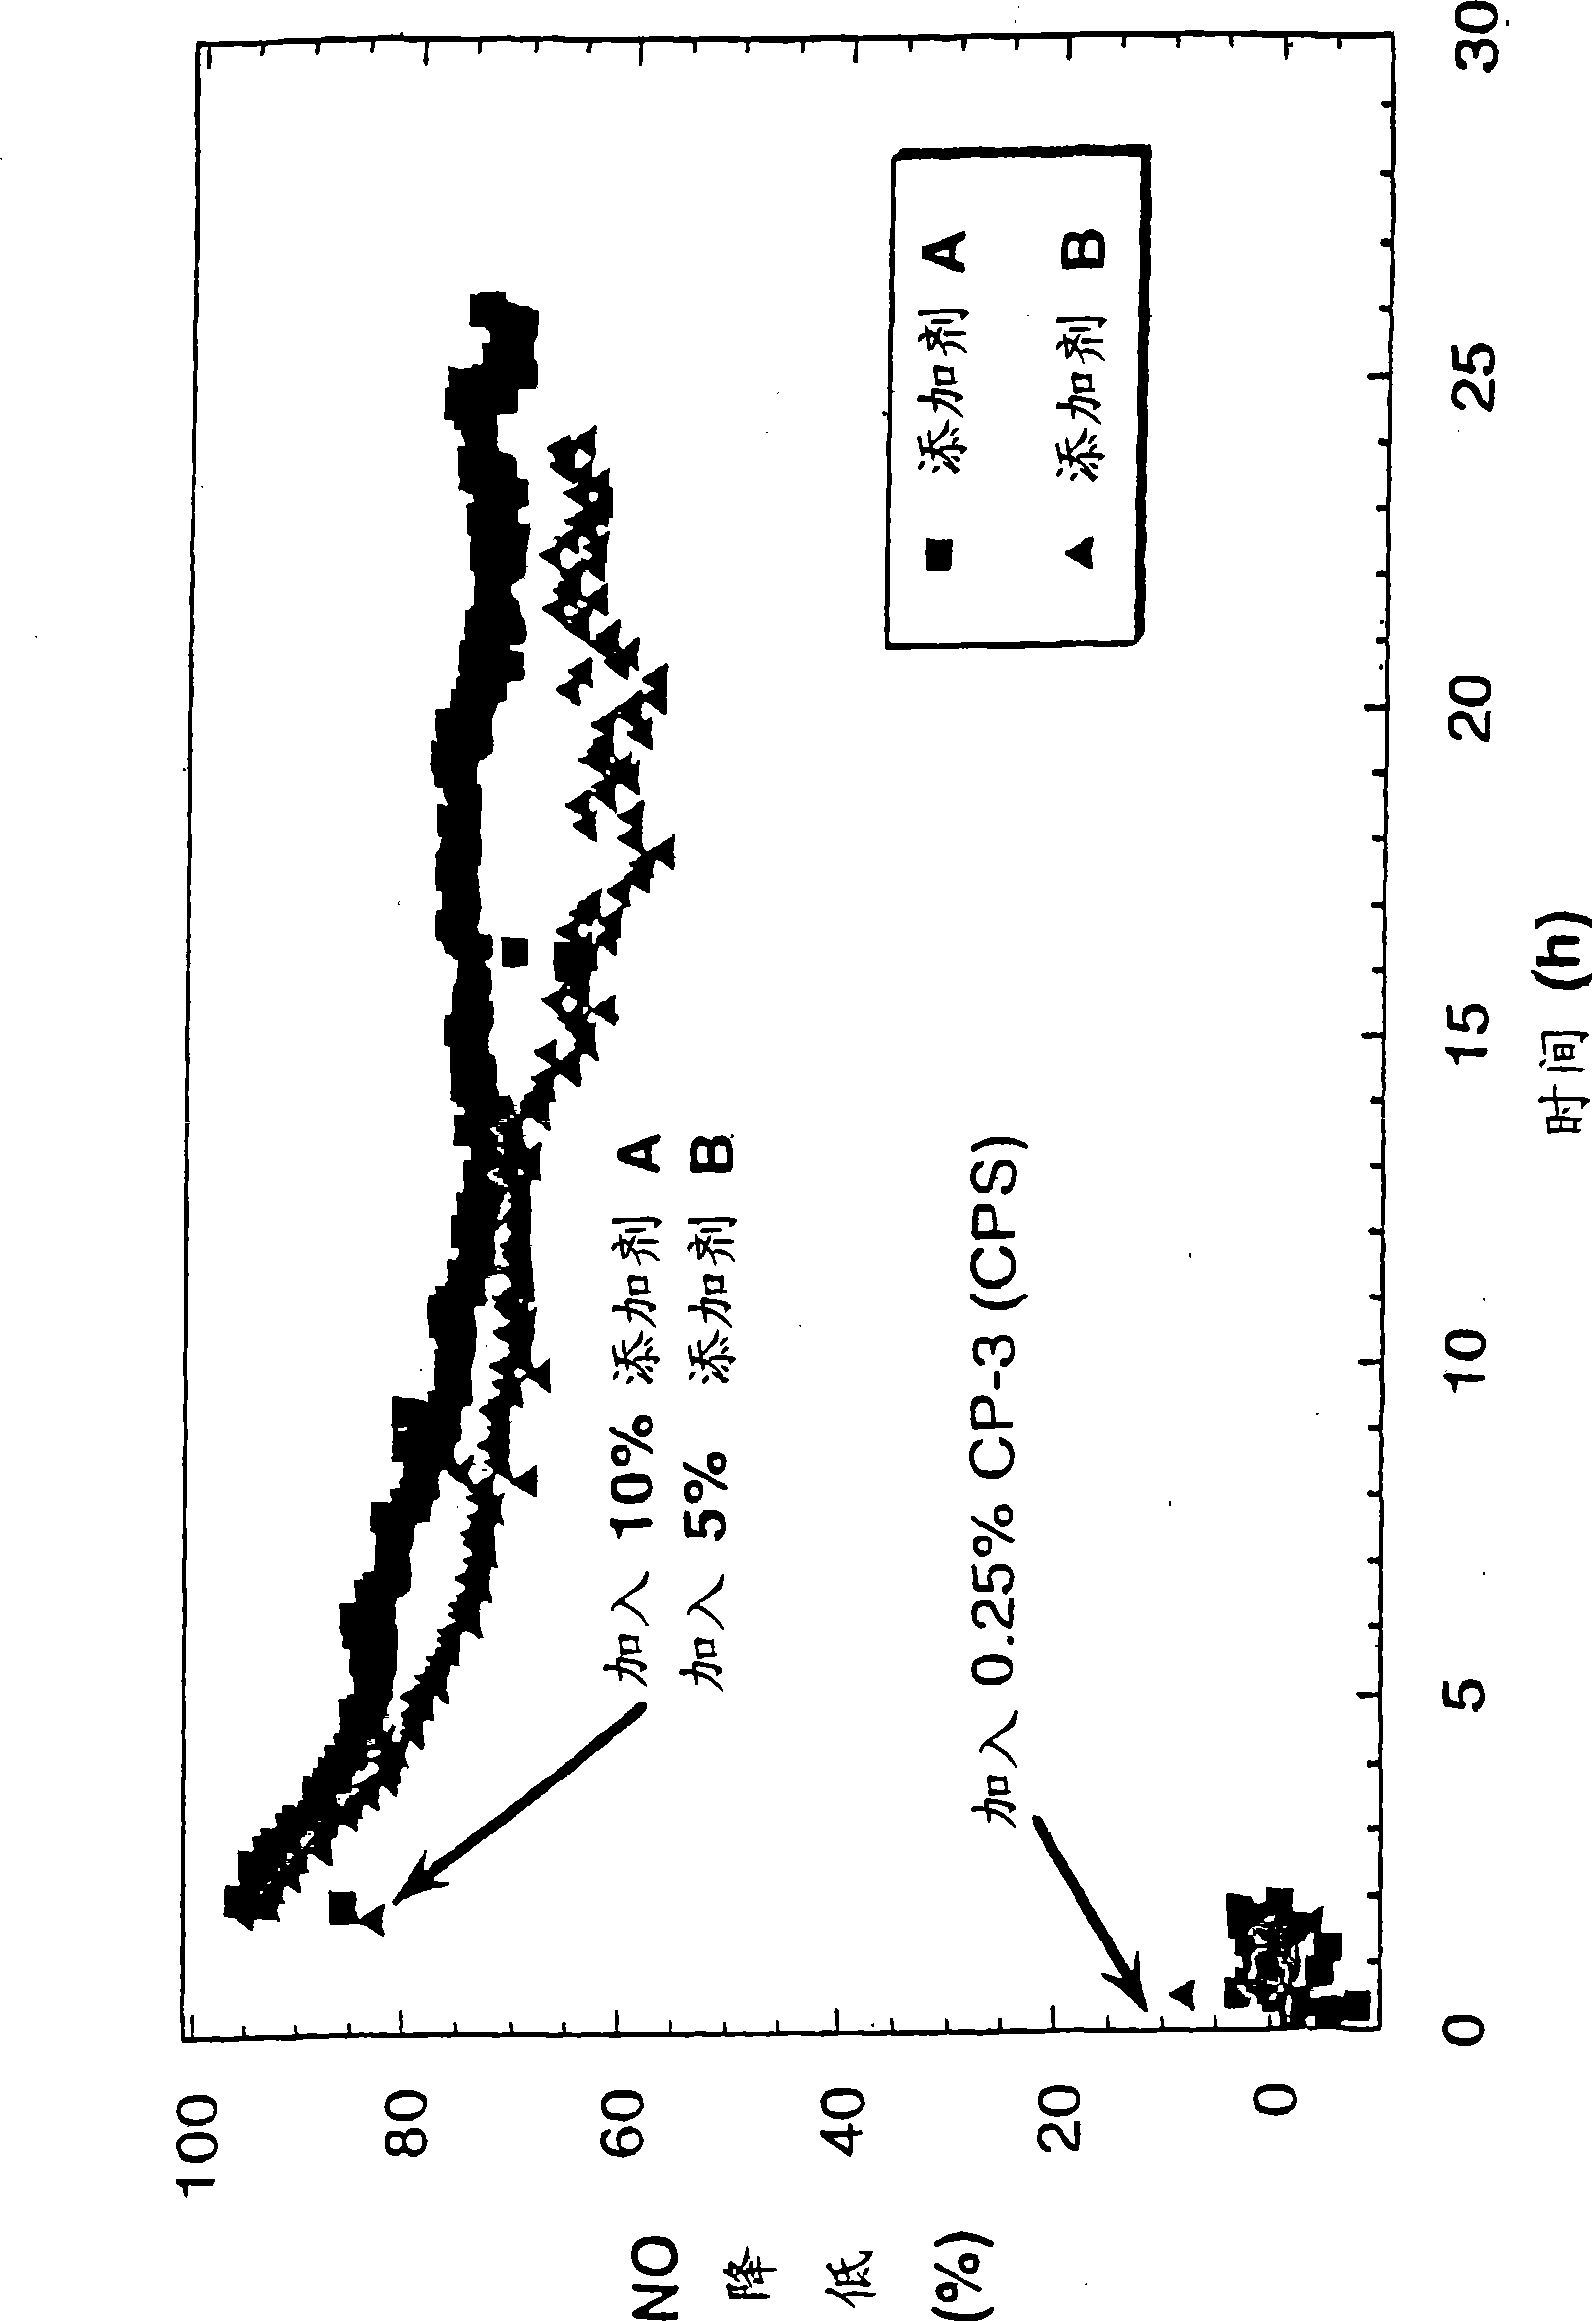 Fluidizing cracking catalyst and method for reducing NOx emissions during fluid catalytic cracking